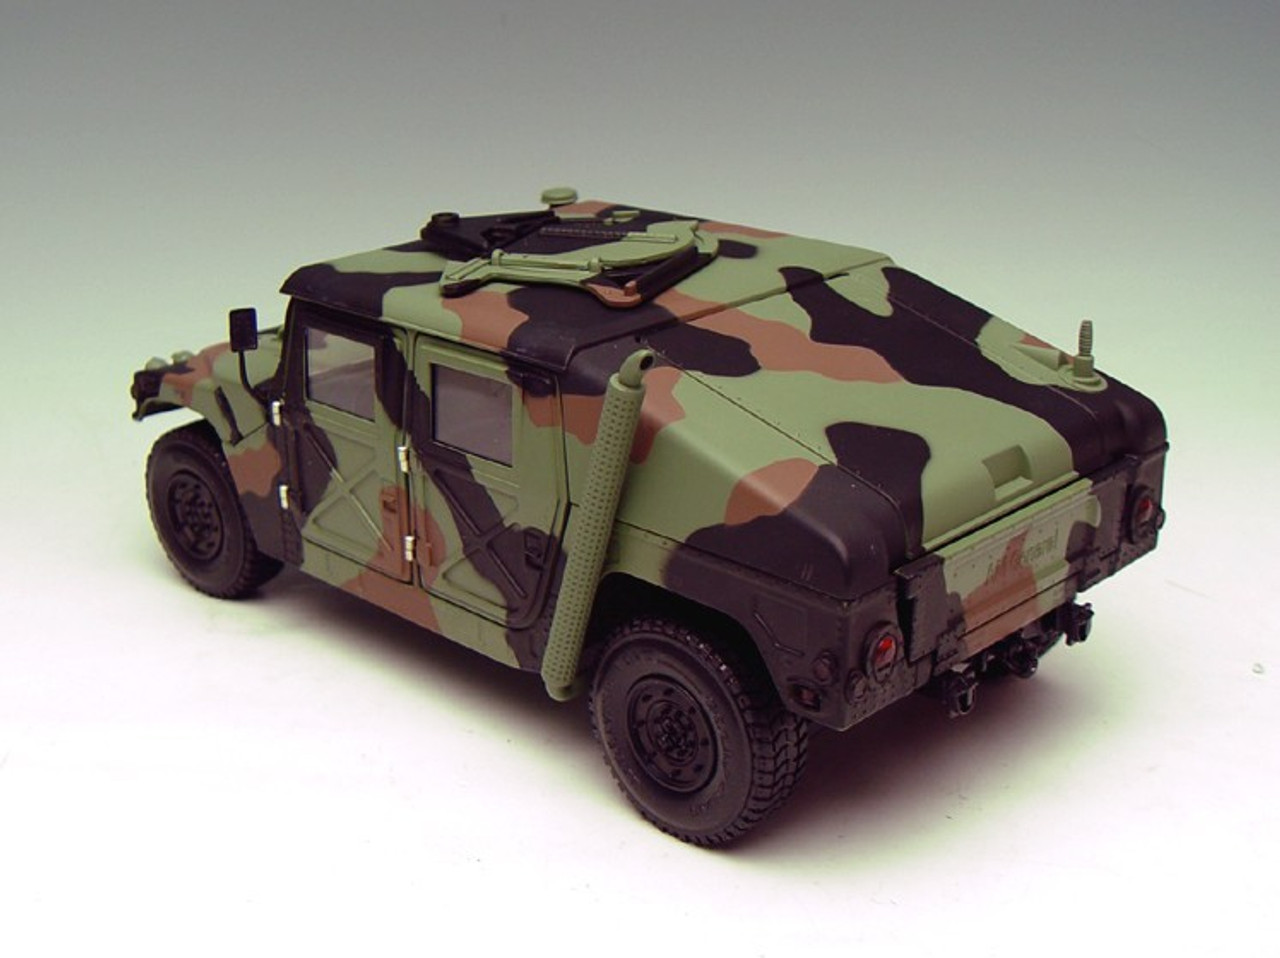 1/18 EXOTO AM GENERAL HUMMER MILITARY COMMAND CAR BATTLE CAMOUFLAGE GREEN